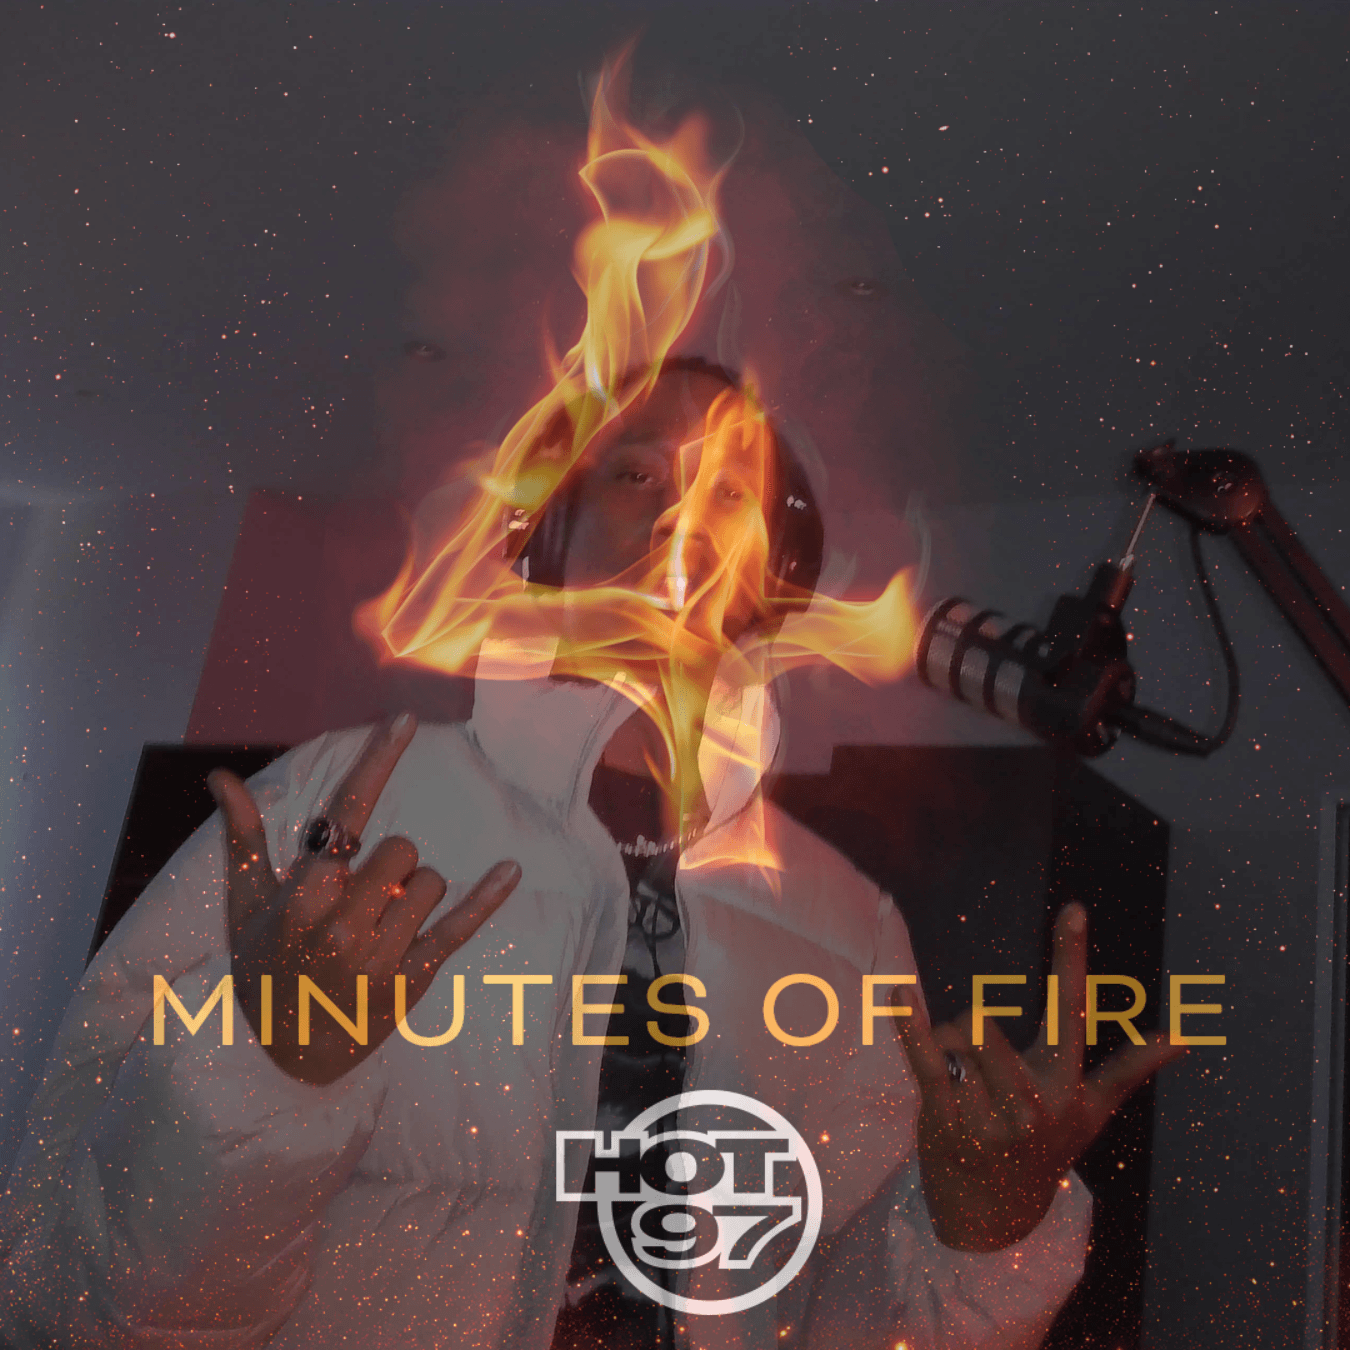 Mir Fontane Debuts New Music on 4 Minutes of Fire